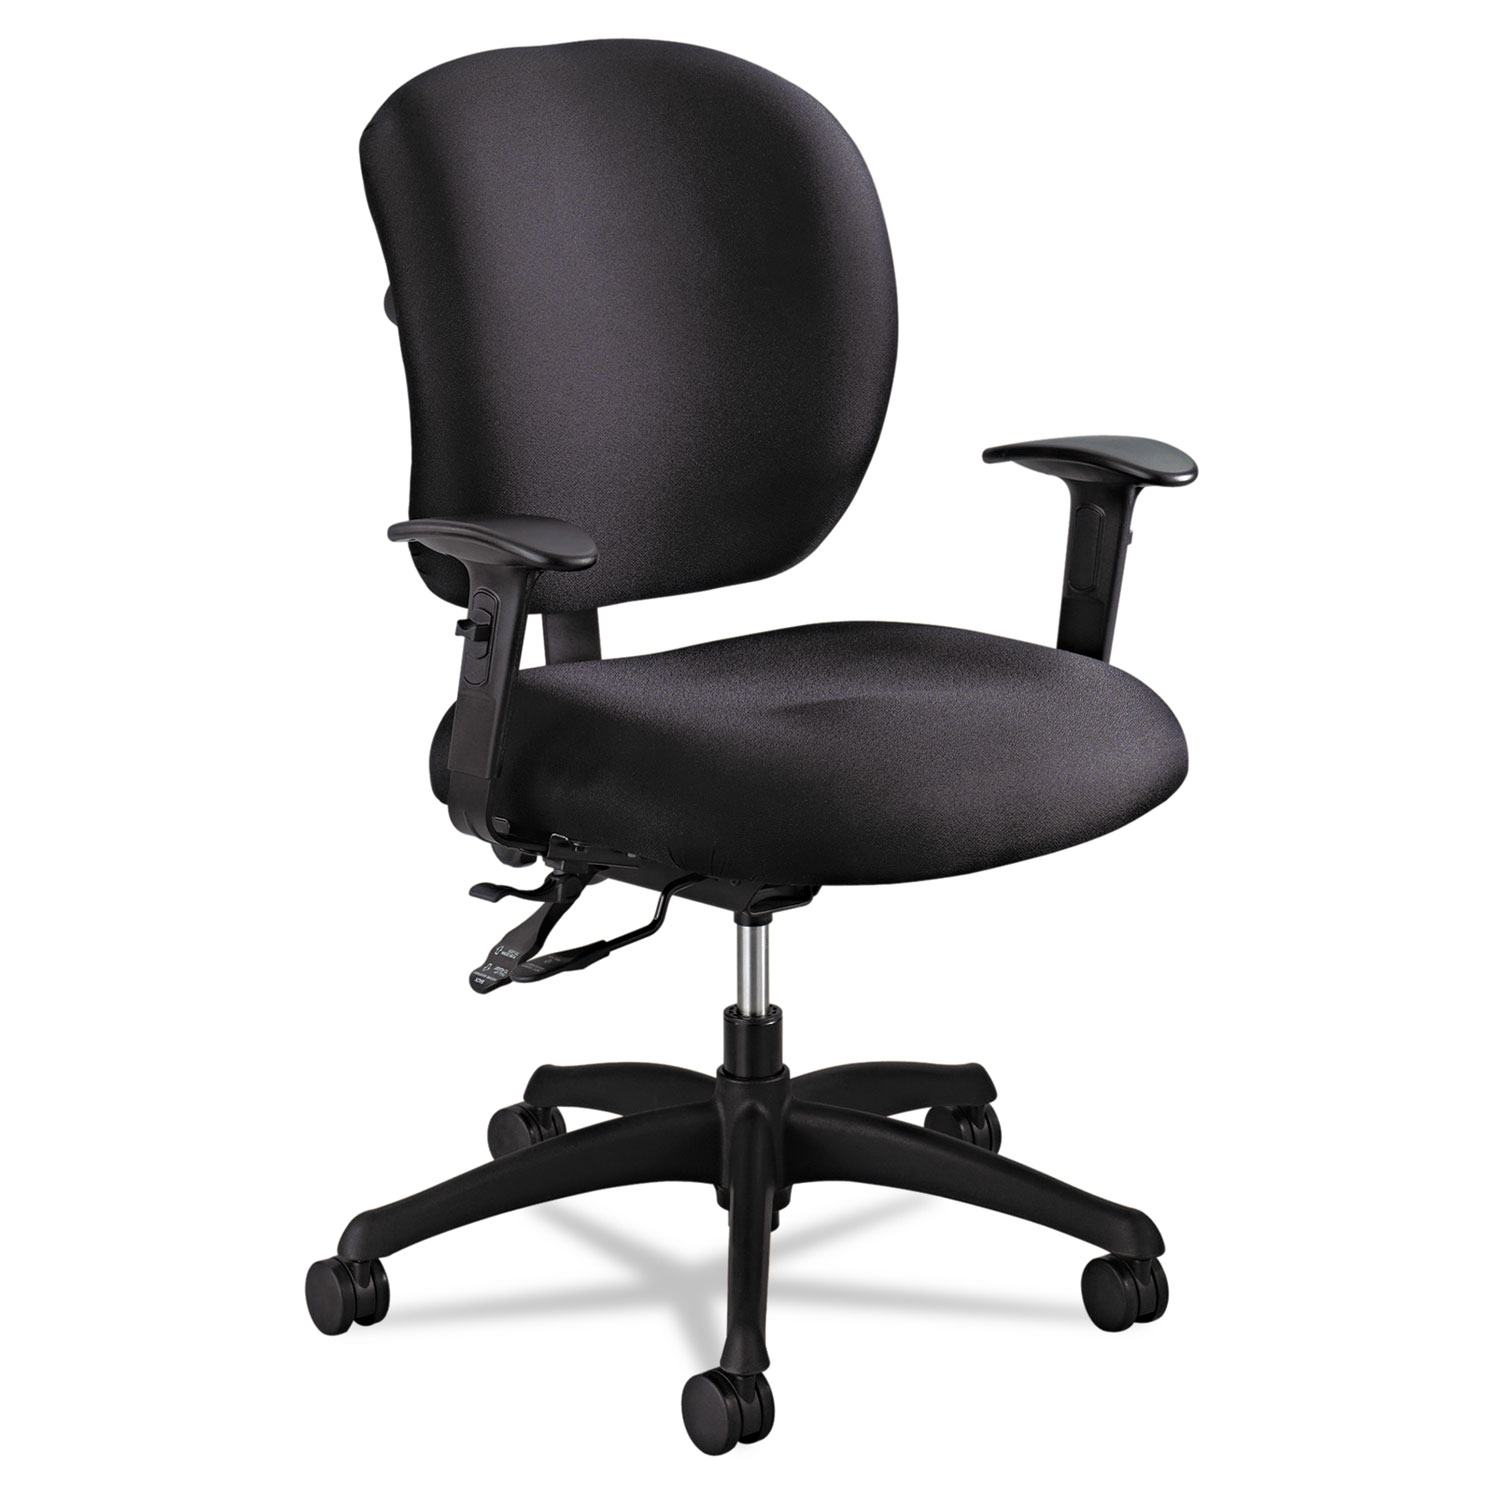  Safco 3391BL Alday Intensive-Use Chair, Supports up to 500 lbs., Black Seat/Black Back, Black Base (SAF3391BL) 